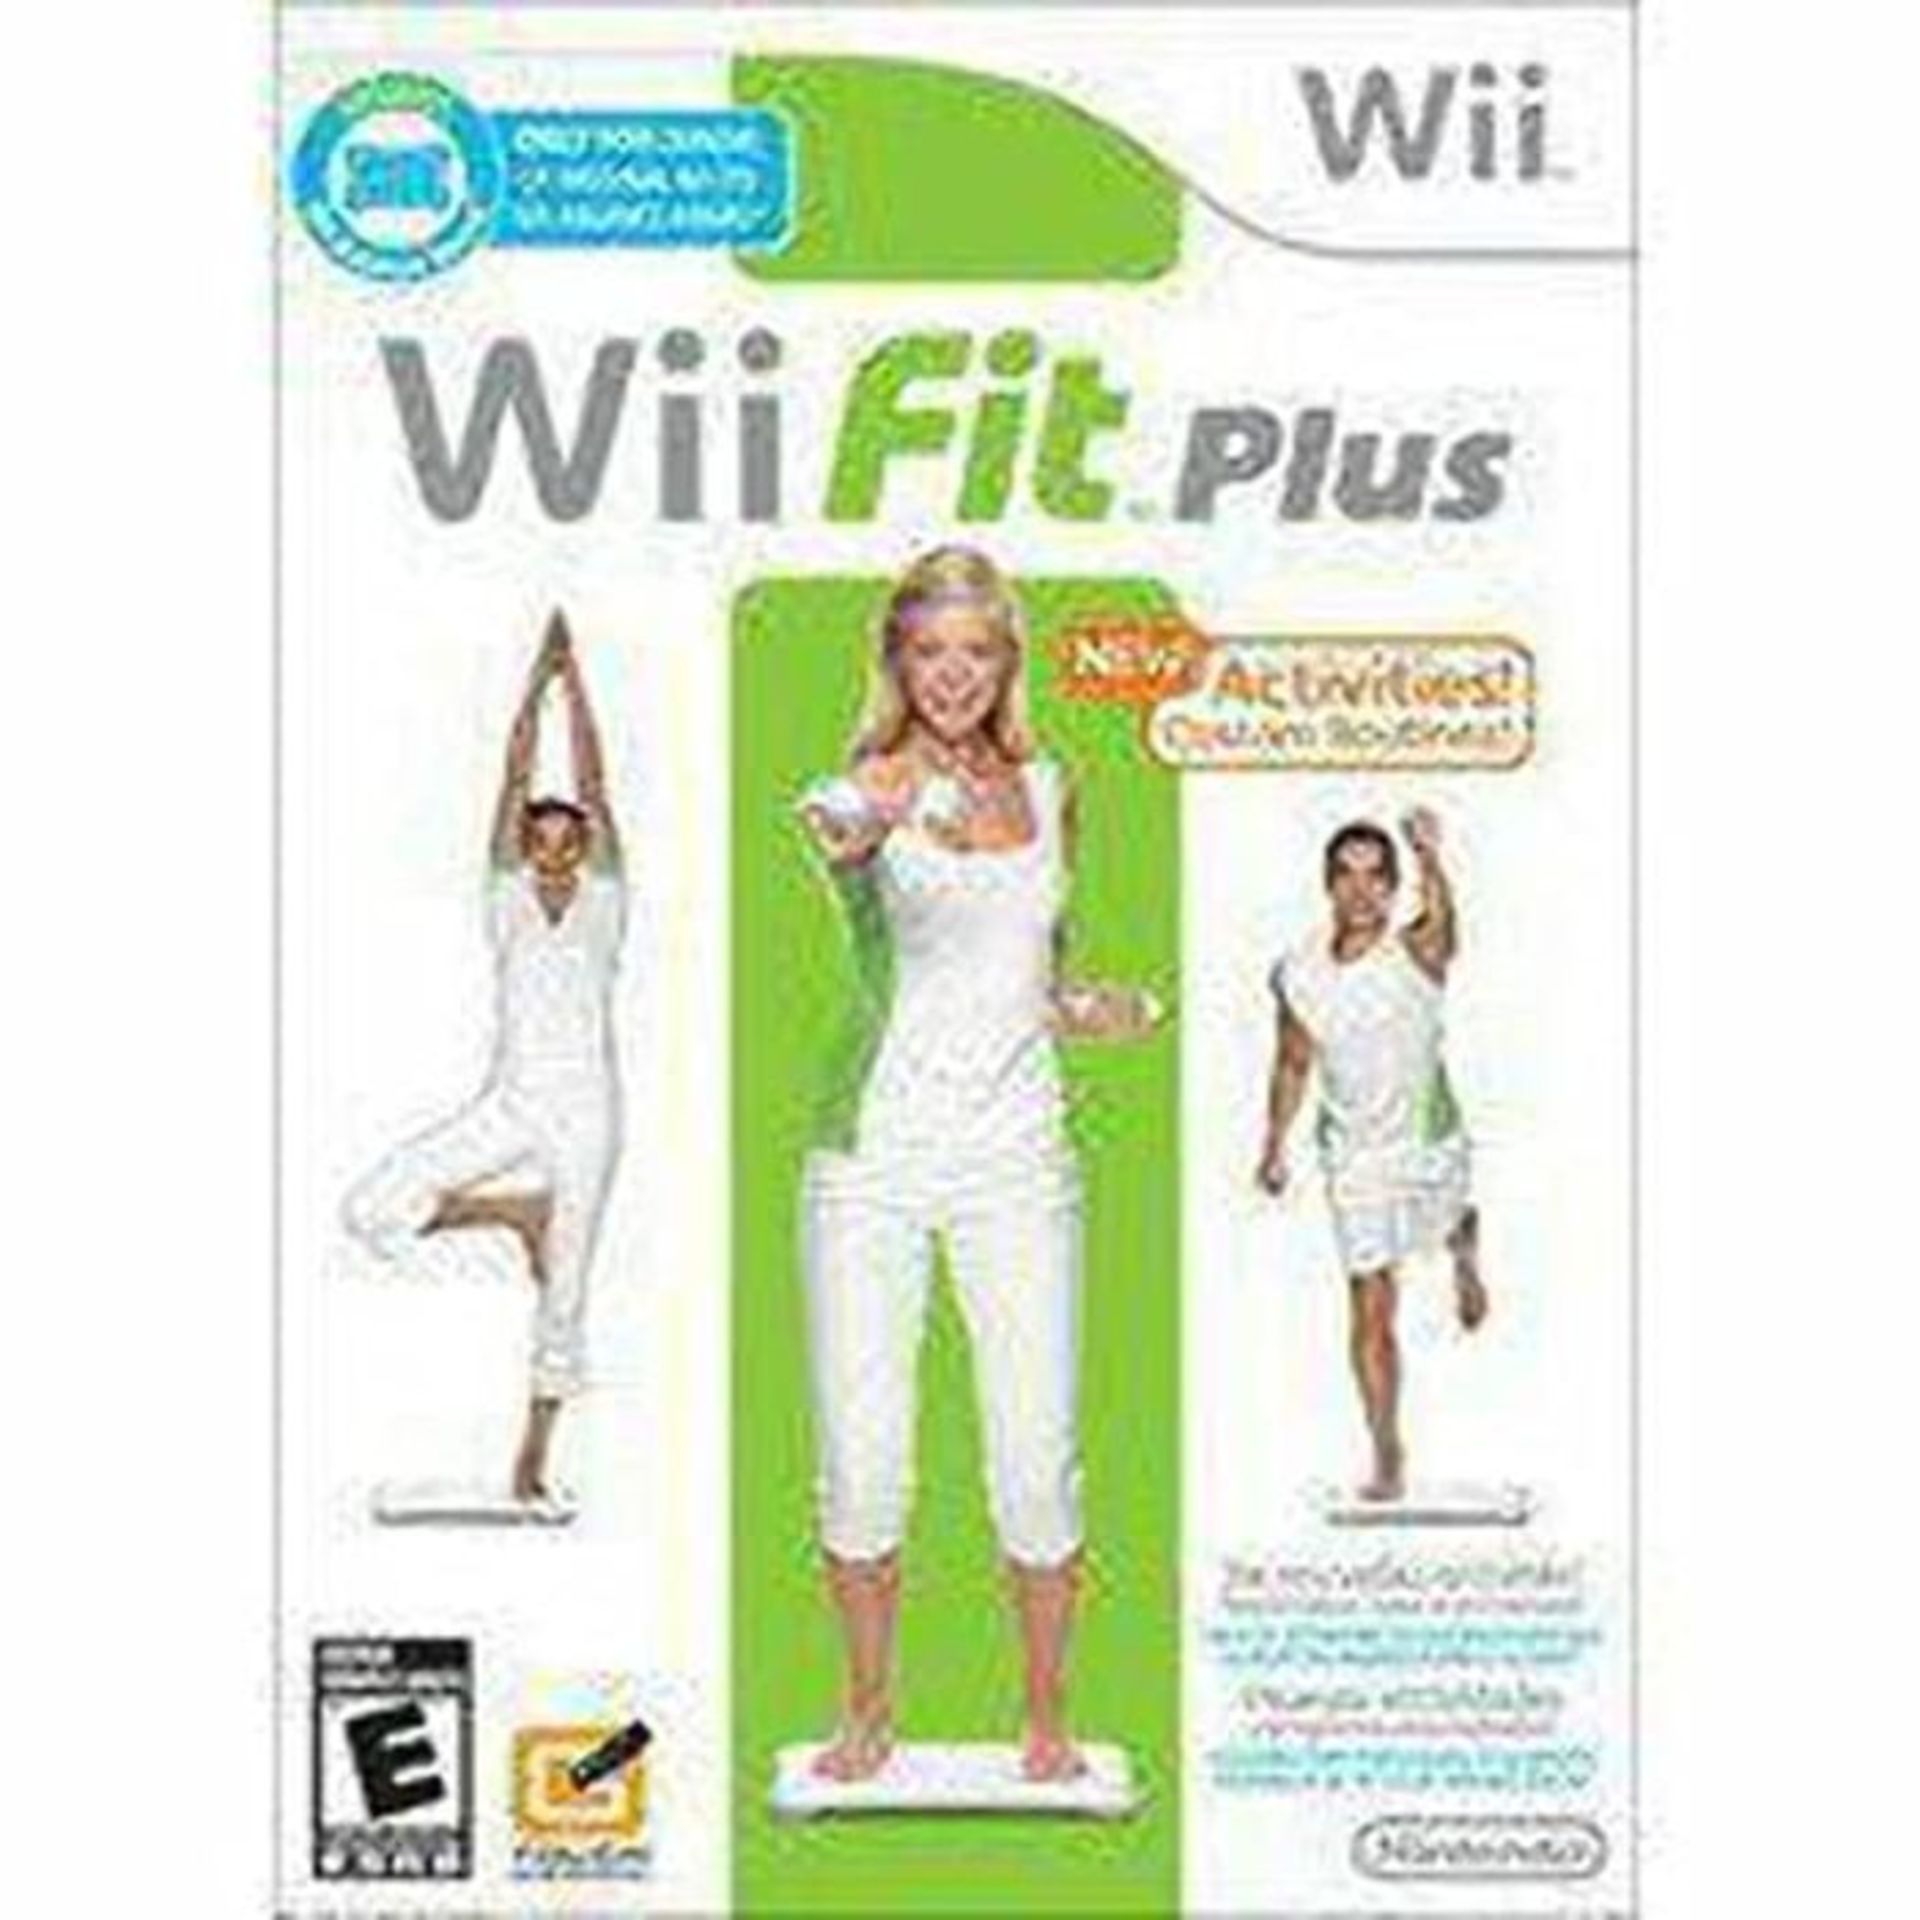 Wii Fit Plus game